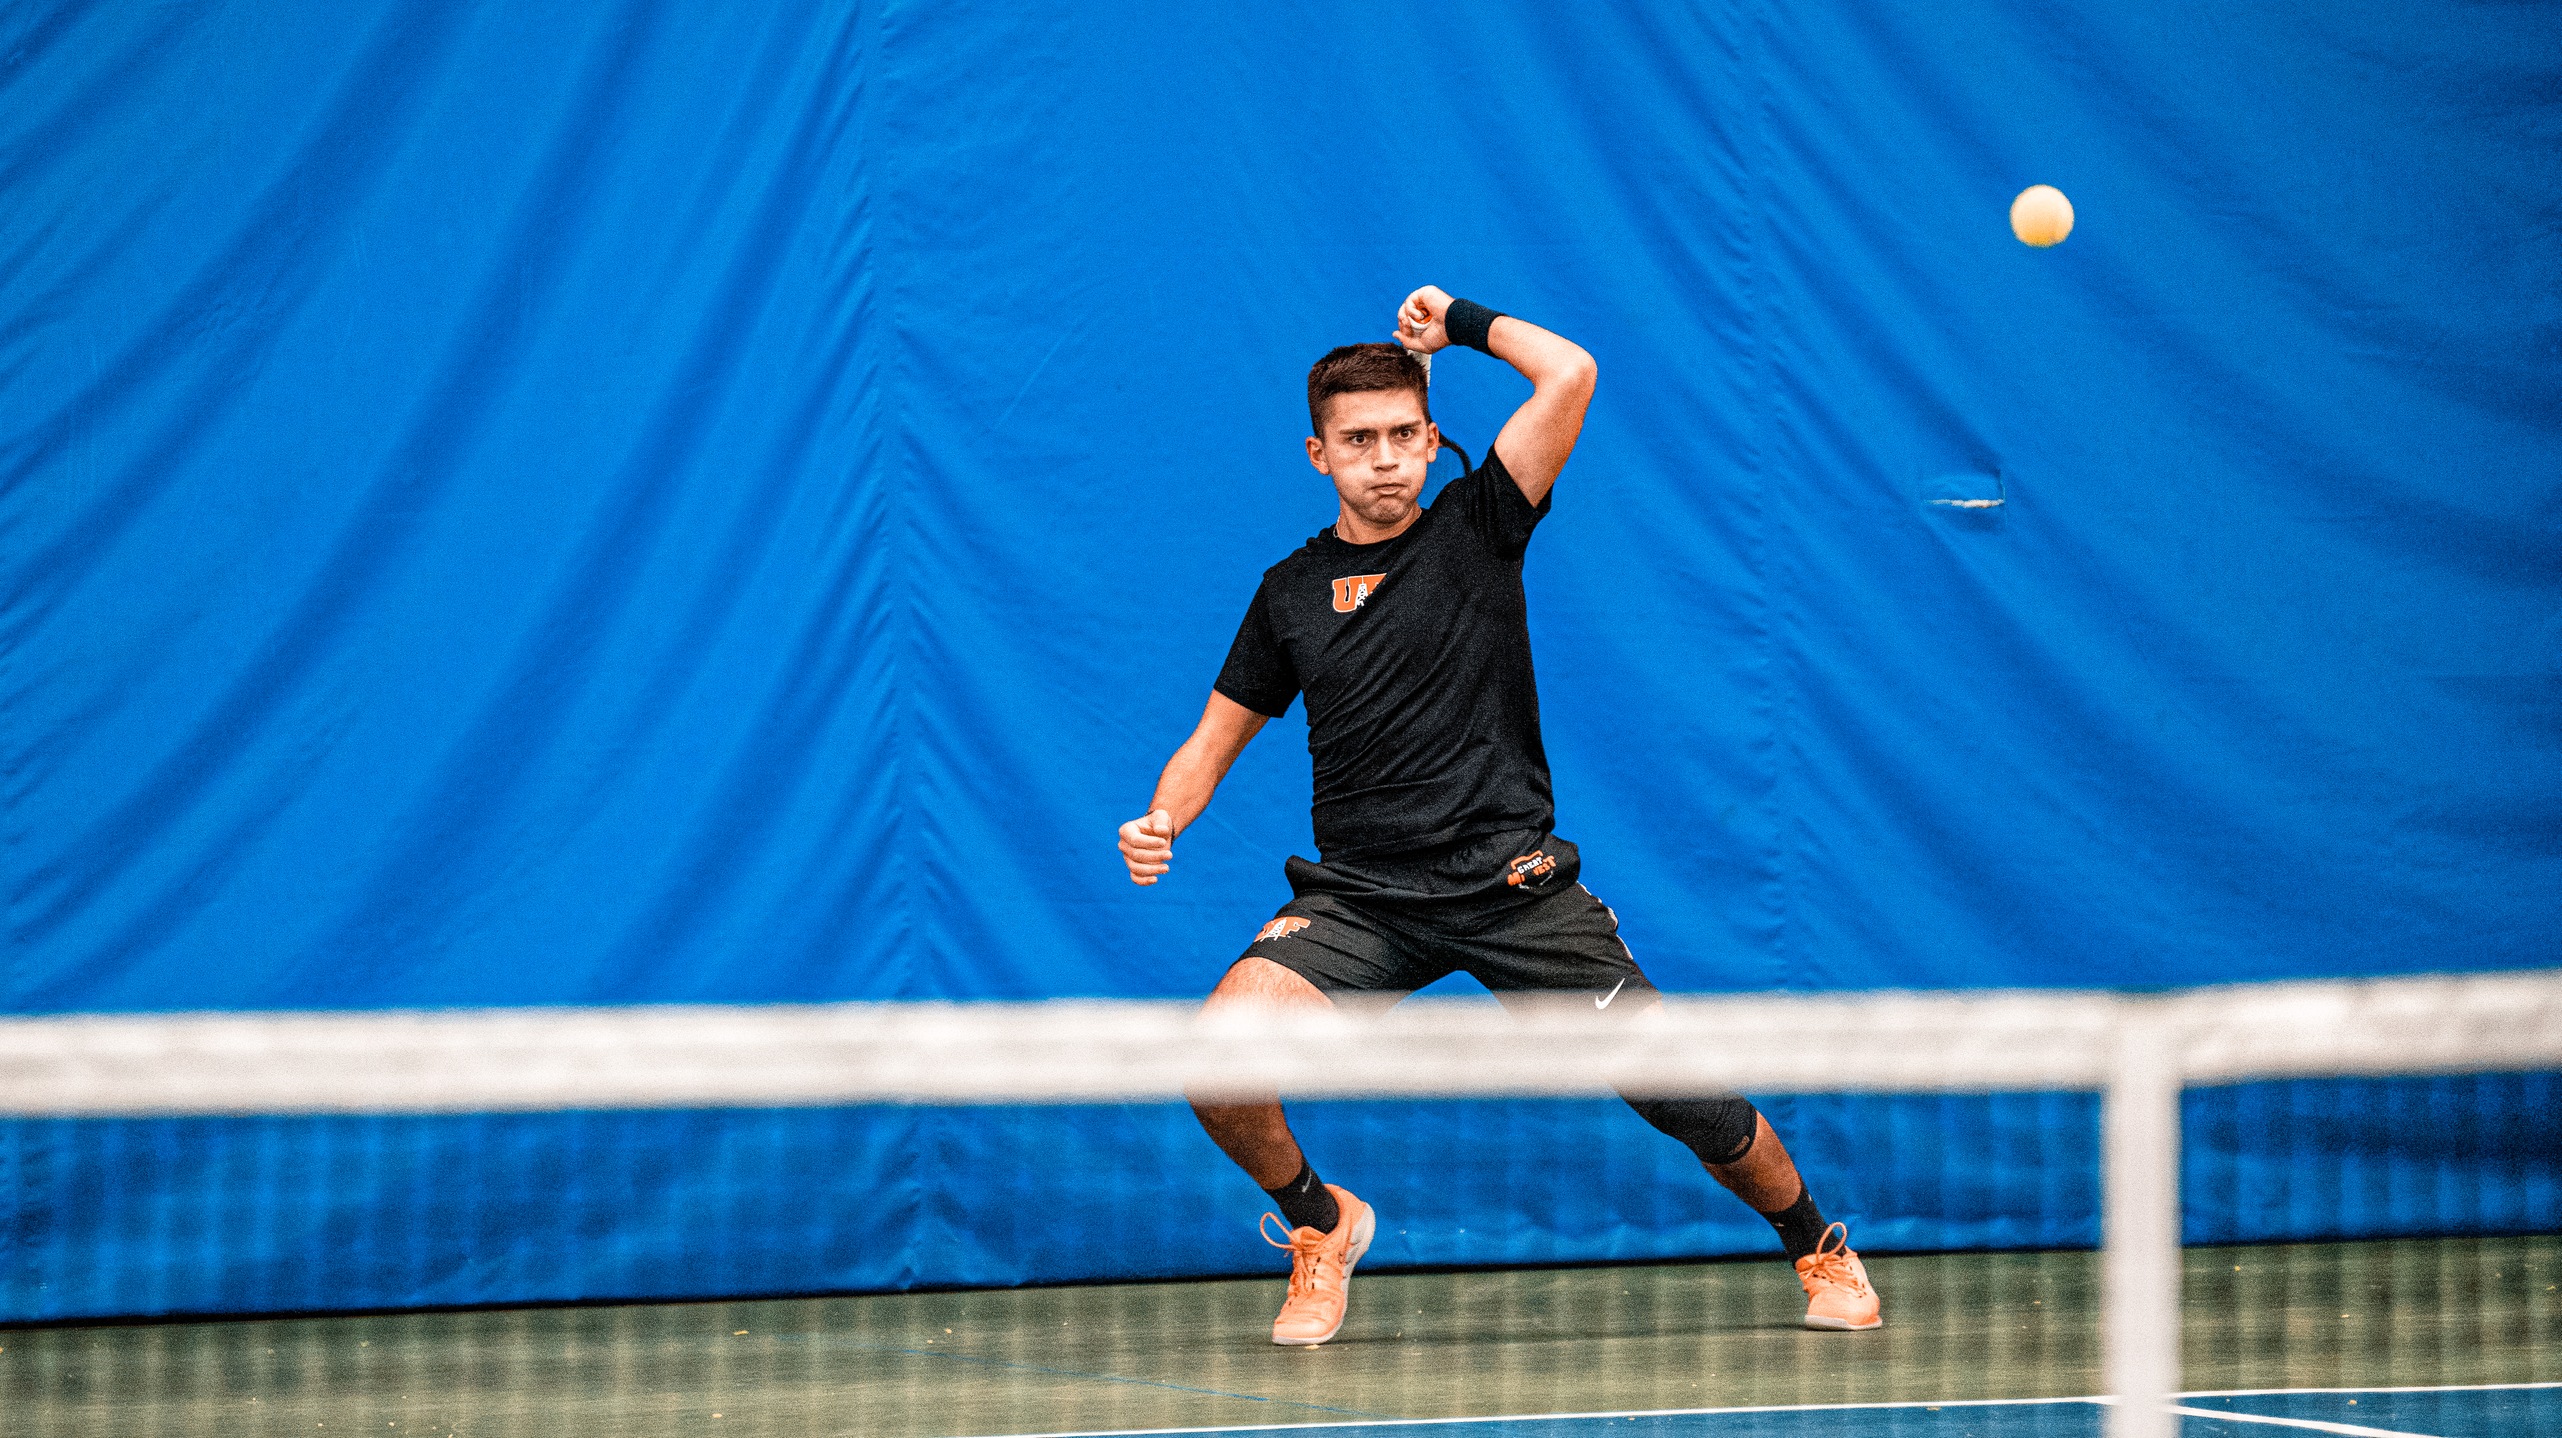 player in black playing tennis